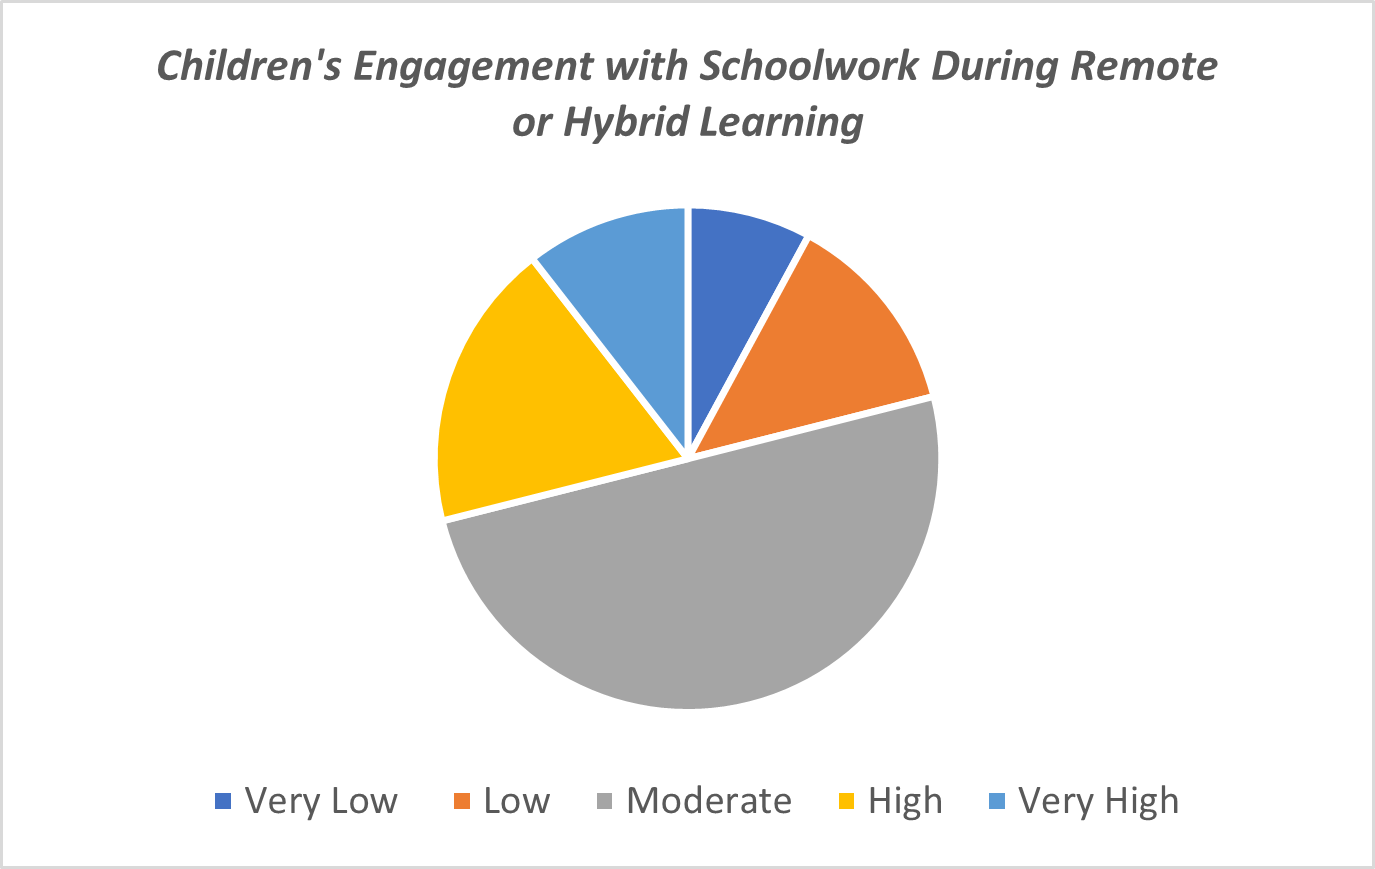 How would you rate your child's level of engagement with schoolwork during remote or hybrid learning?